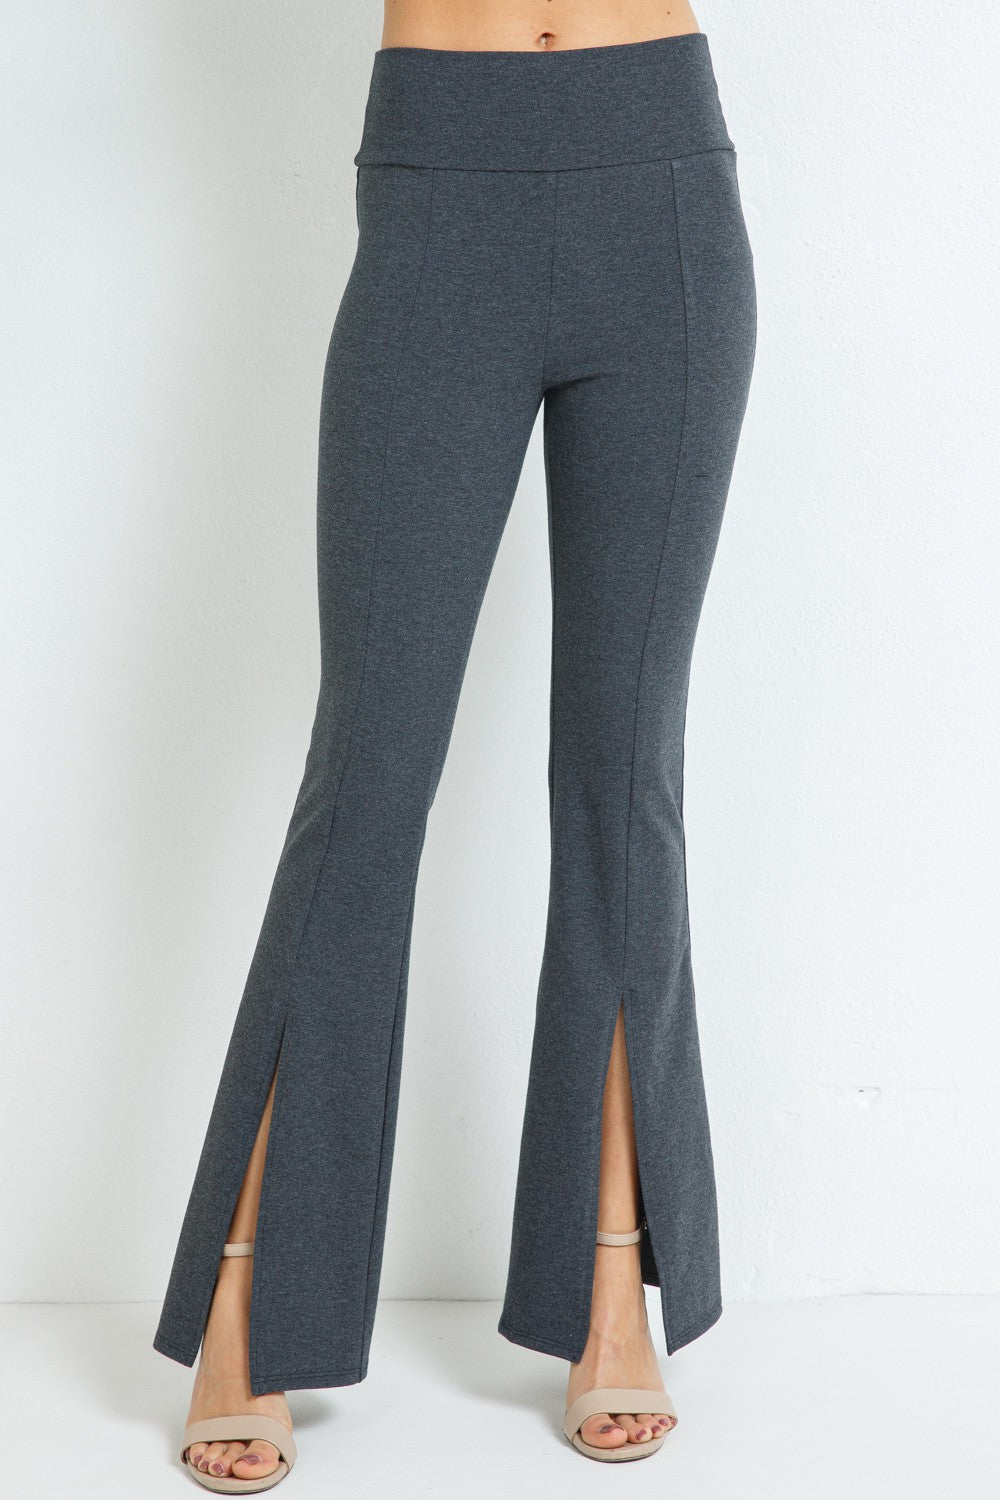 Women's Front Slit Flare Pants in BLACK OR CHARCOAL GRAY